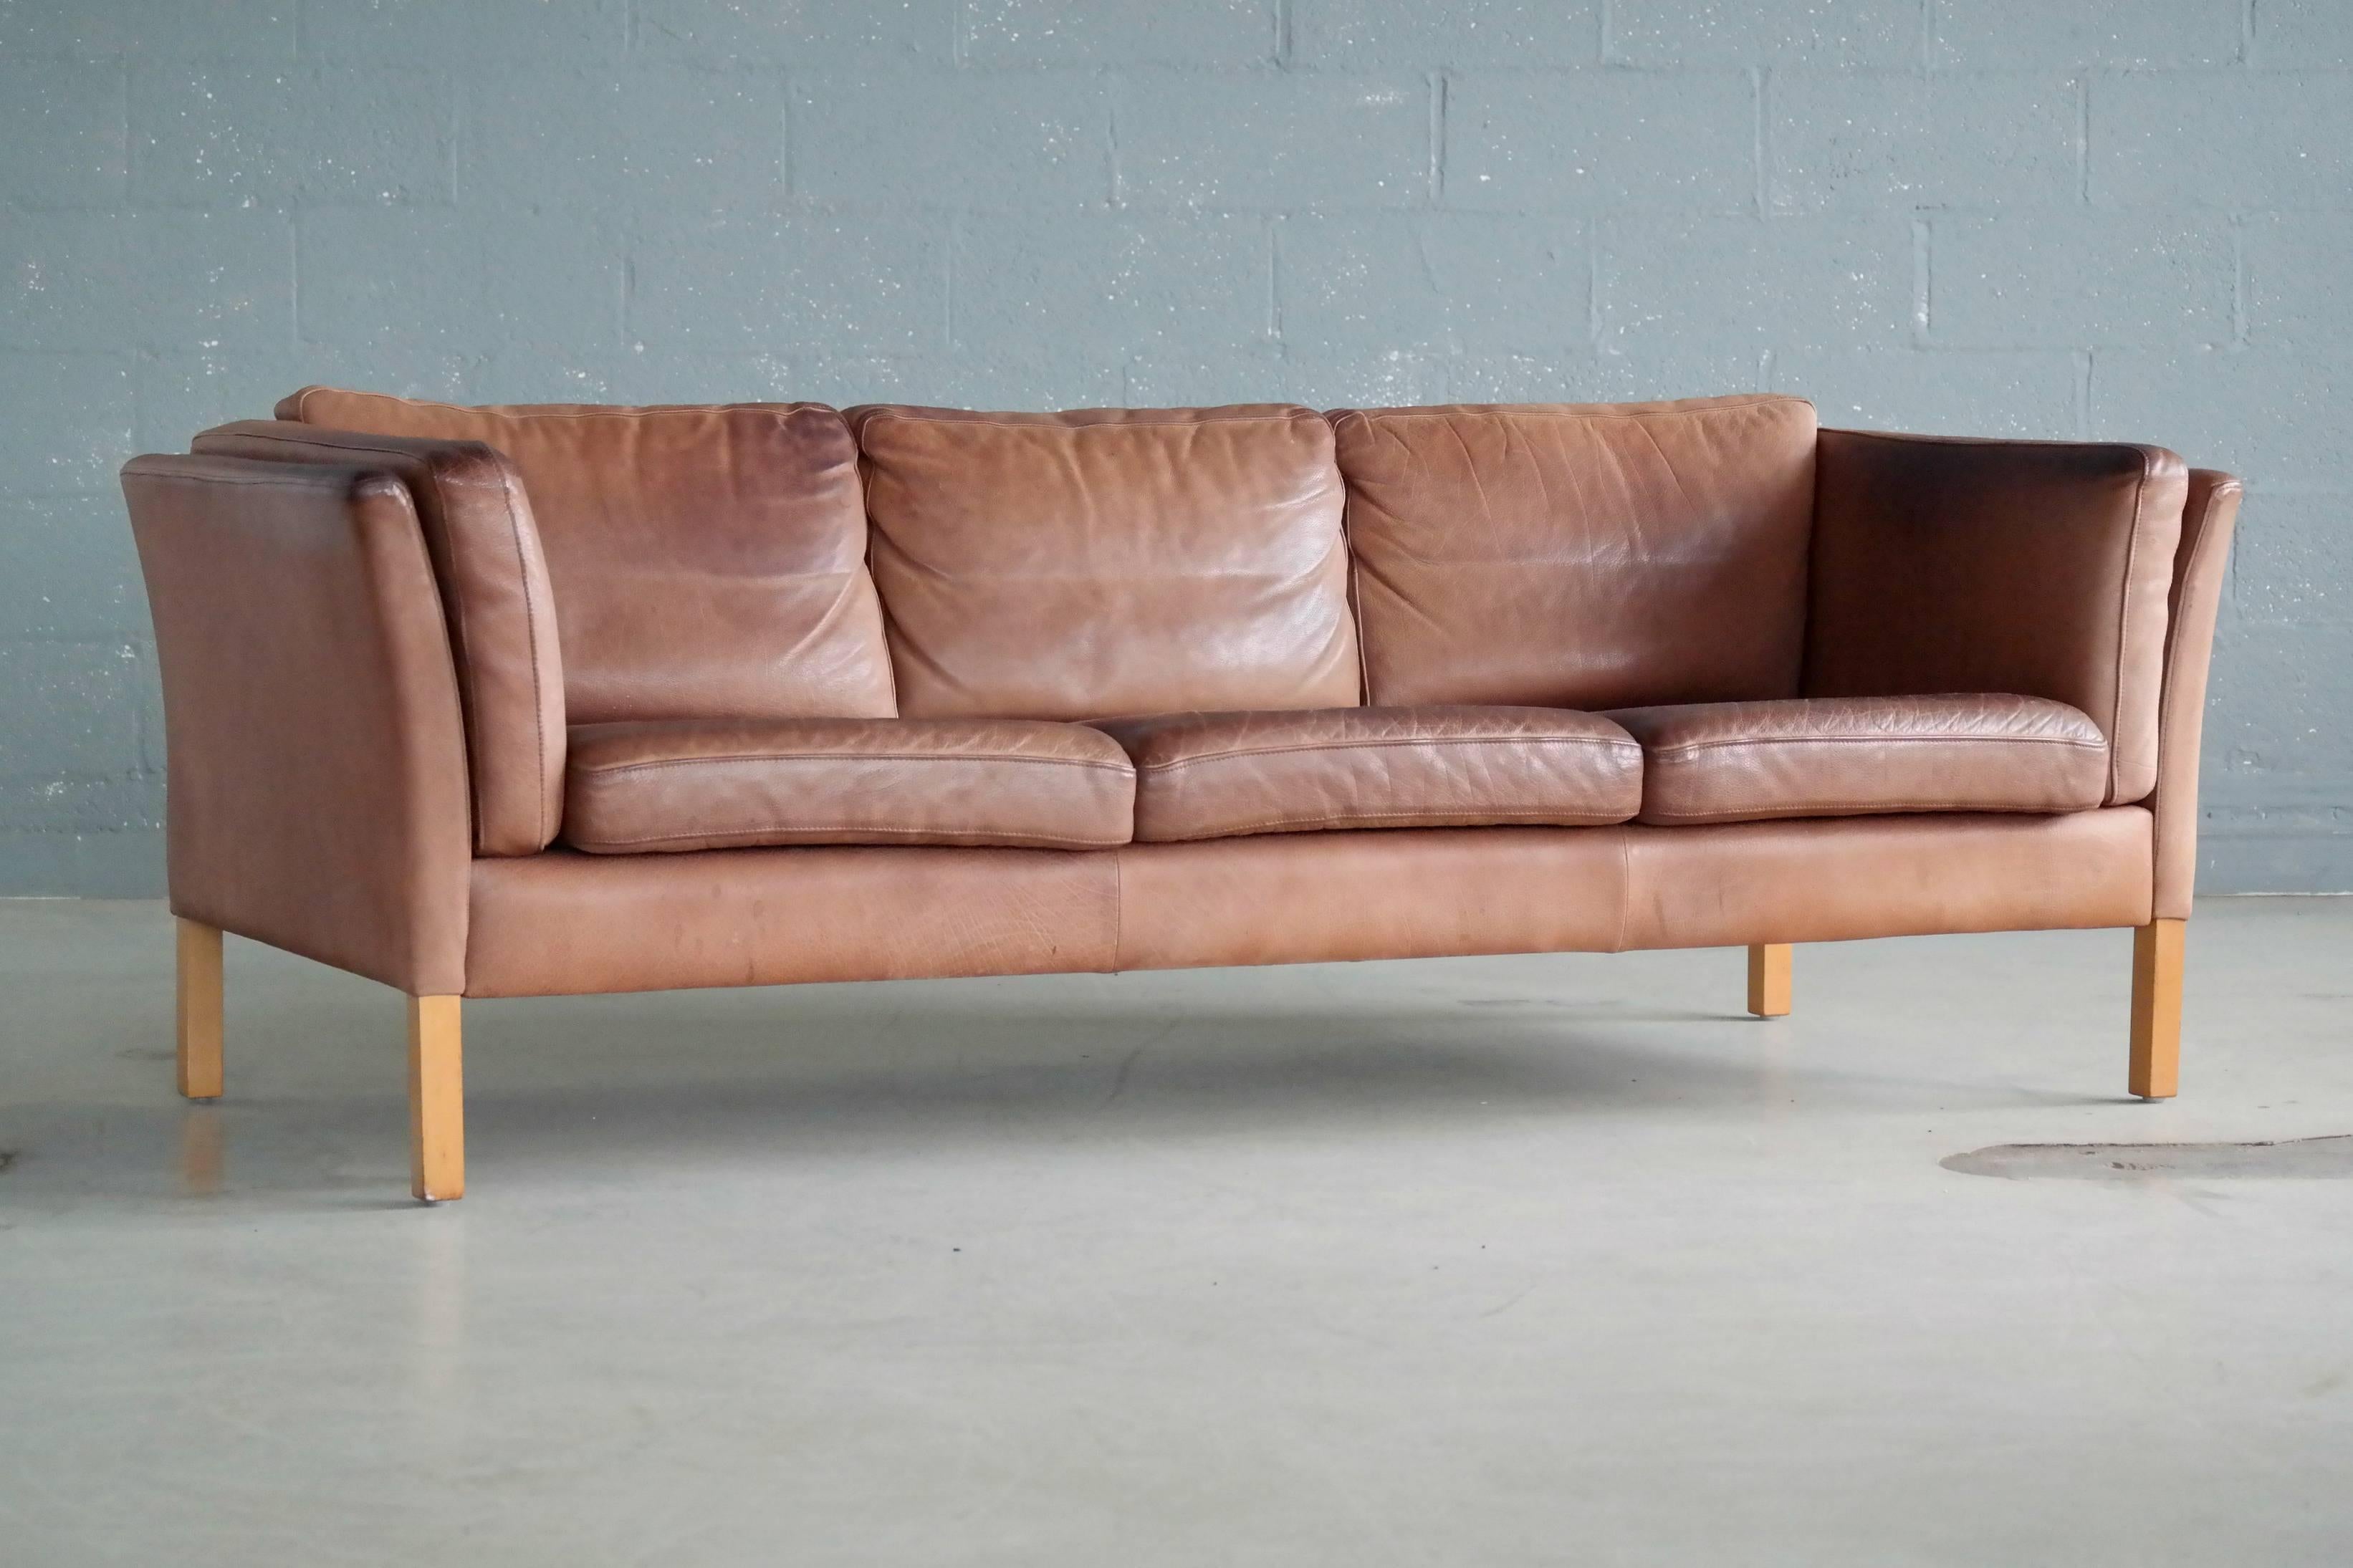 Highest quality craftsmanship Borge Mogensen style sofa in light cognac colored buffalo leather by Stouby Mobler. Thick supple buffalo leather showing great grain - some sun fading of the color and just the perfect amount of patina and wear, scuffs